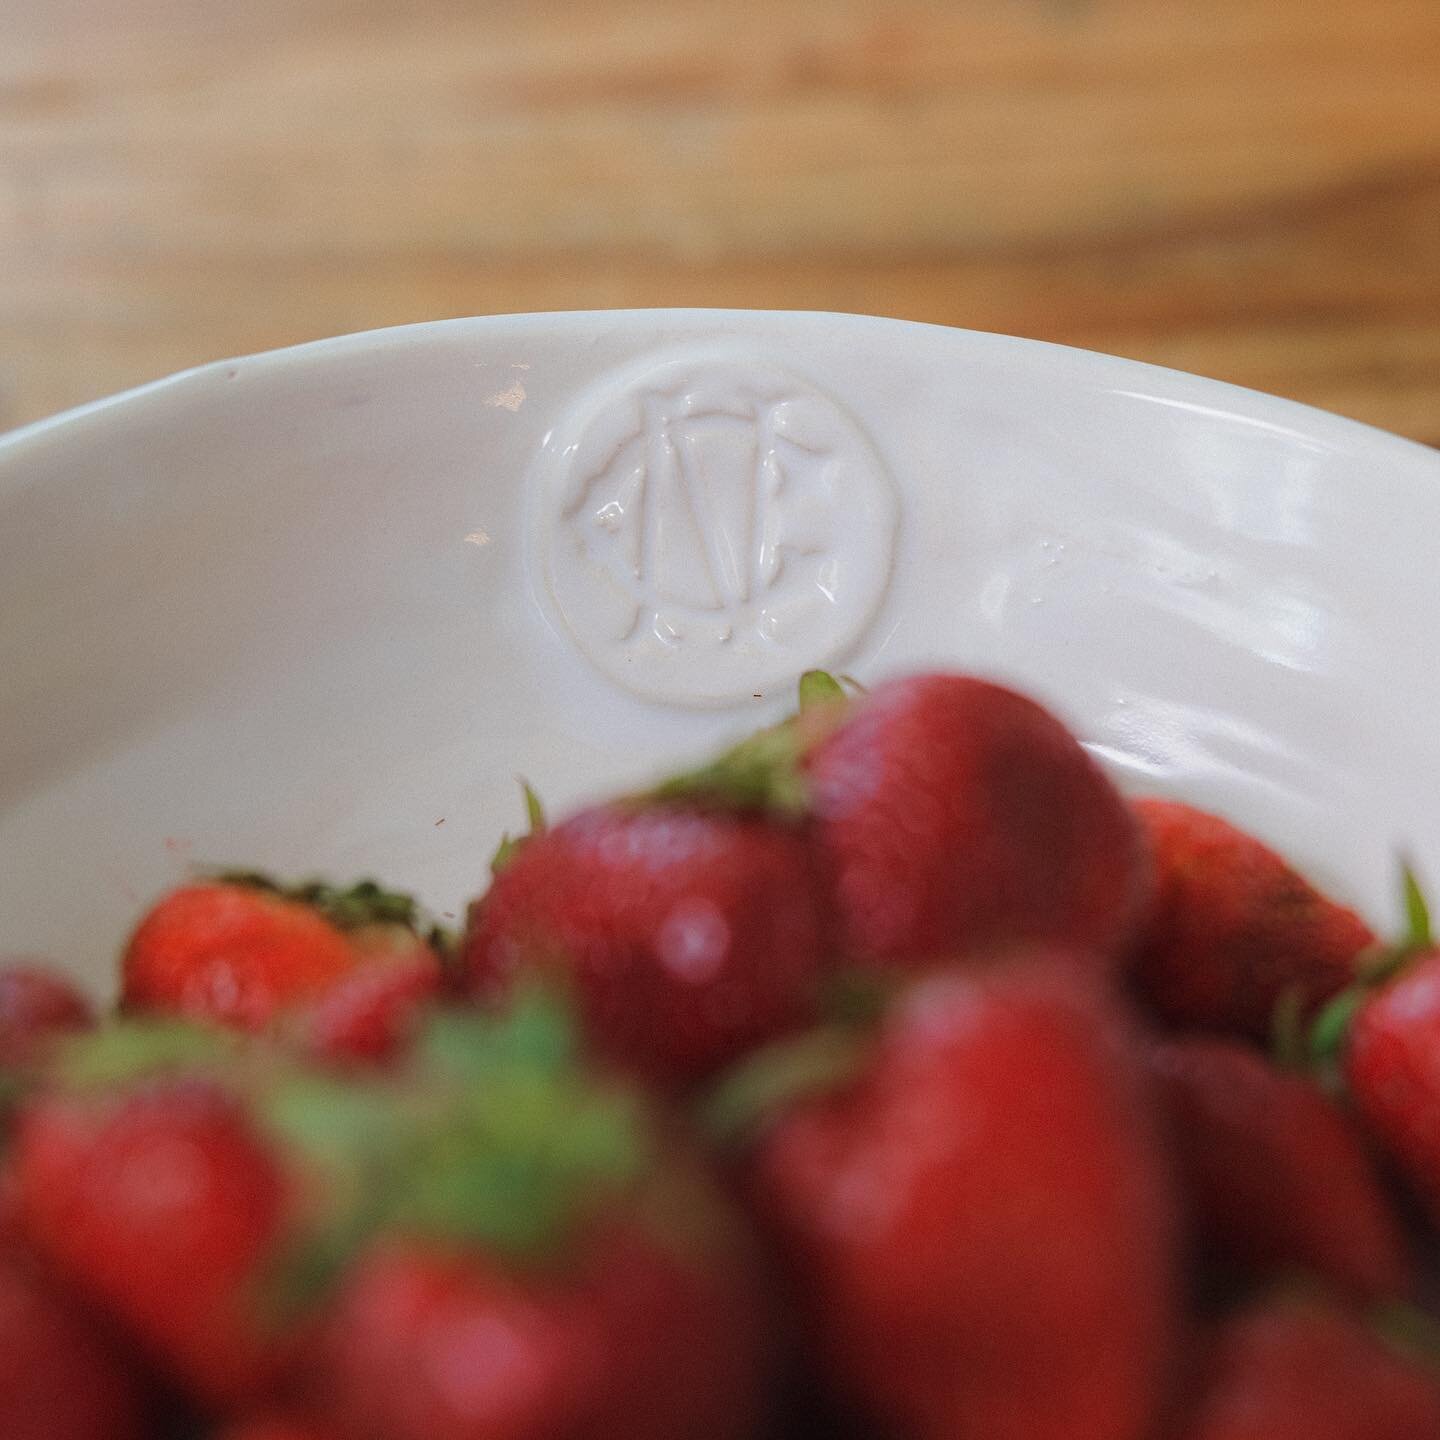 Calling all couples and middle initial-haters &mdash; meet our newest stamp style: a two initial monogram! This classic monogram style adds an elegance to your personalized dishes (and makes you feel fancy even if you&rsquo;re just eating a bowl of l